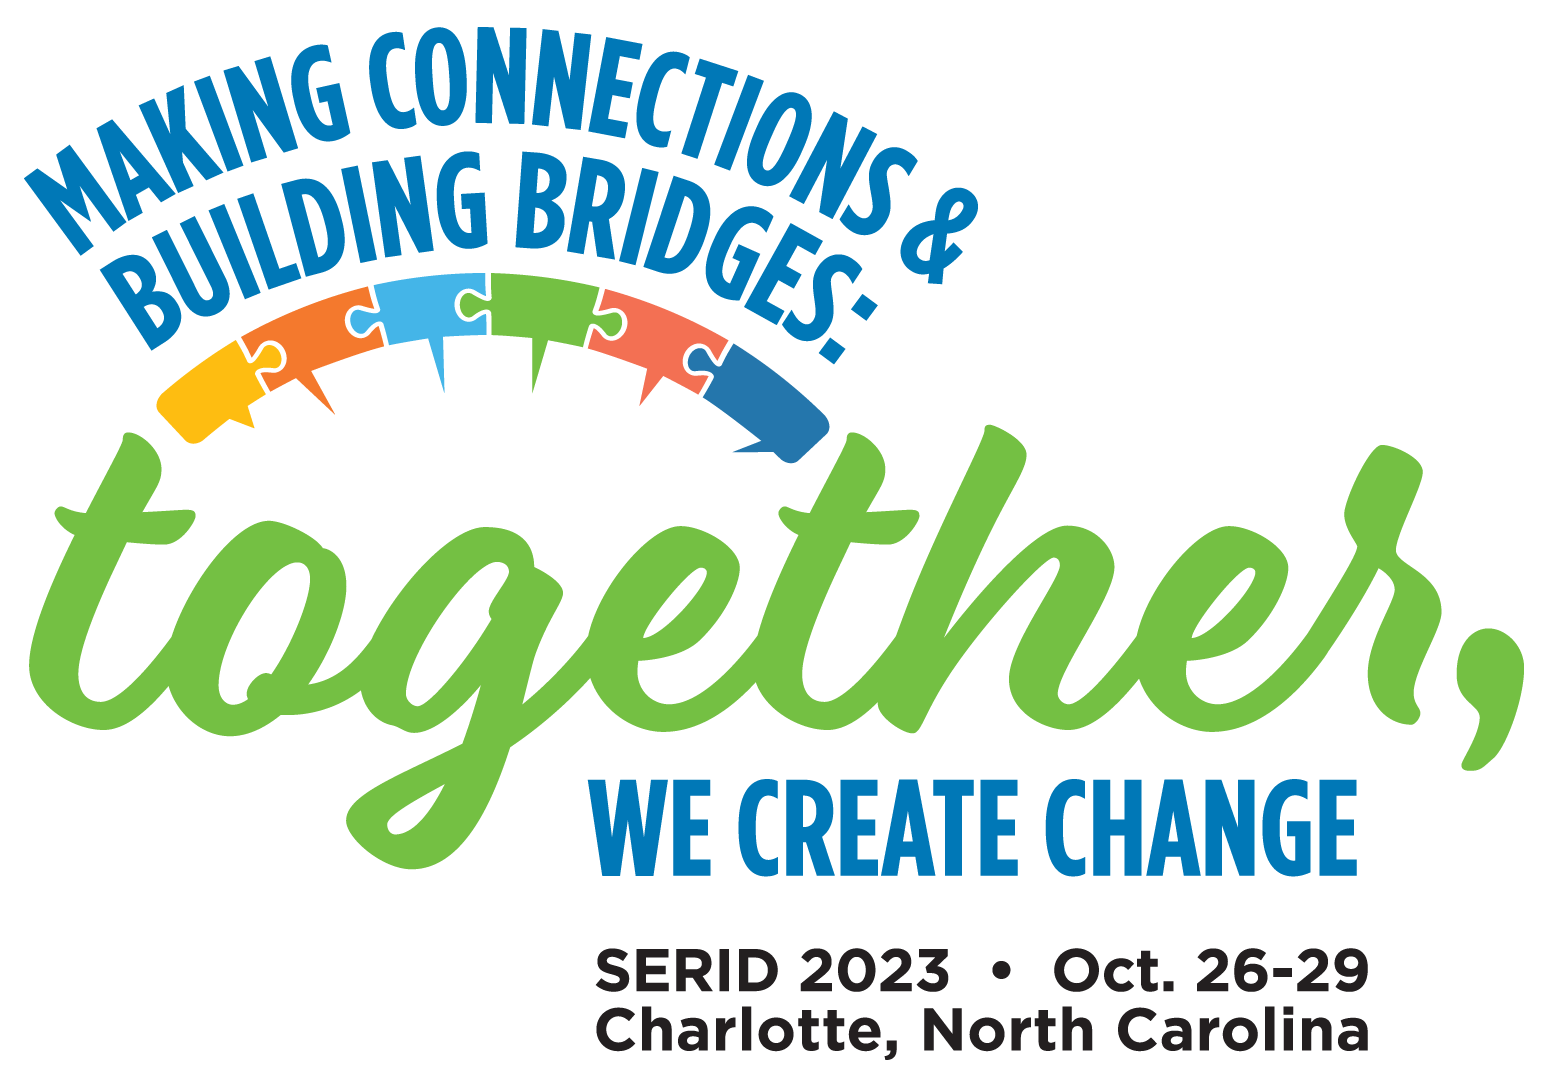 Making Connections & Building Bridges: Together, We Create Change. SERID 2023, Oct. 26-29, Charlotte, North Carolina with small arch of puzzles in multiples colors.